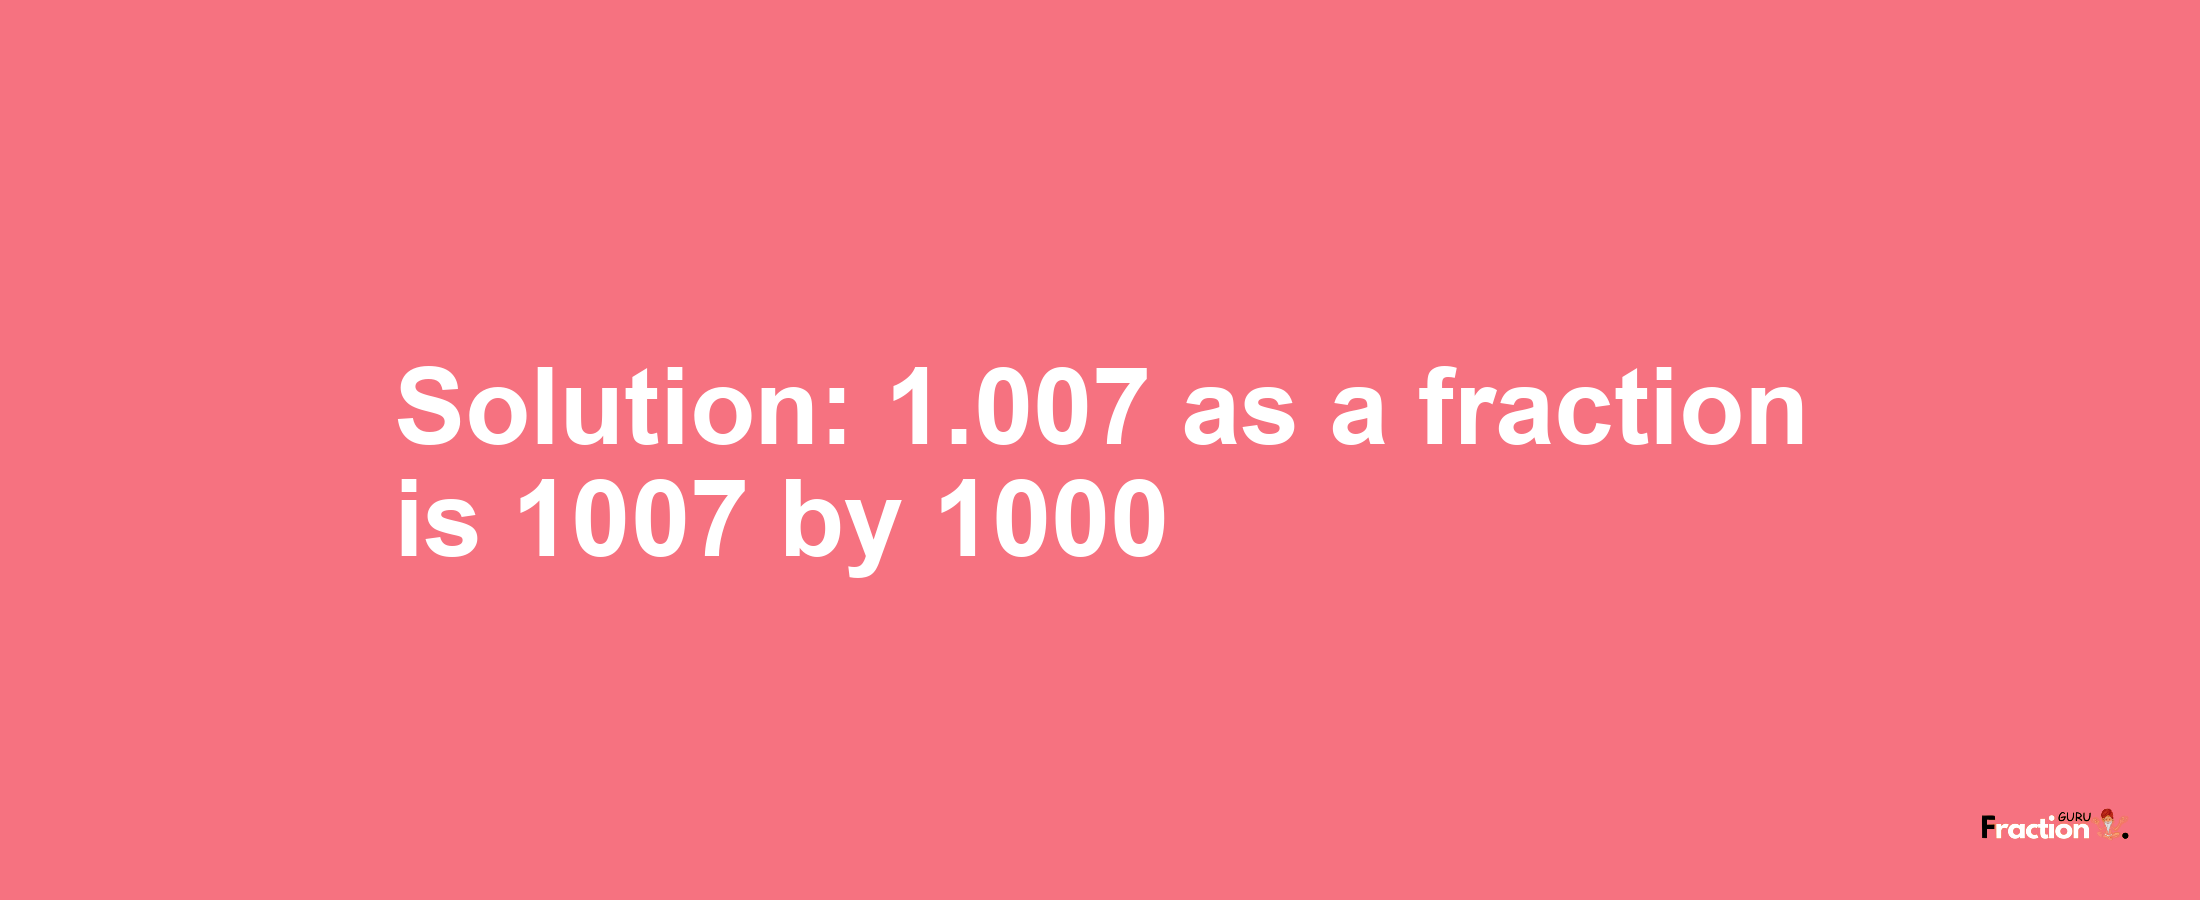 Solution:1.007 as a fraction is 1007/1000